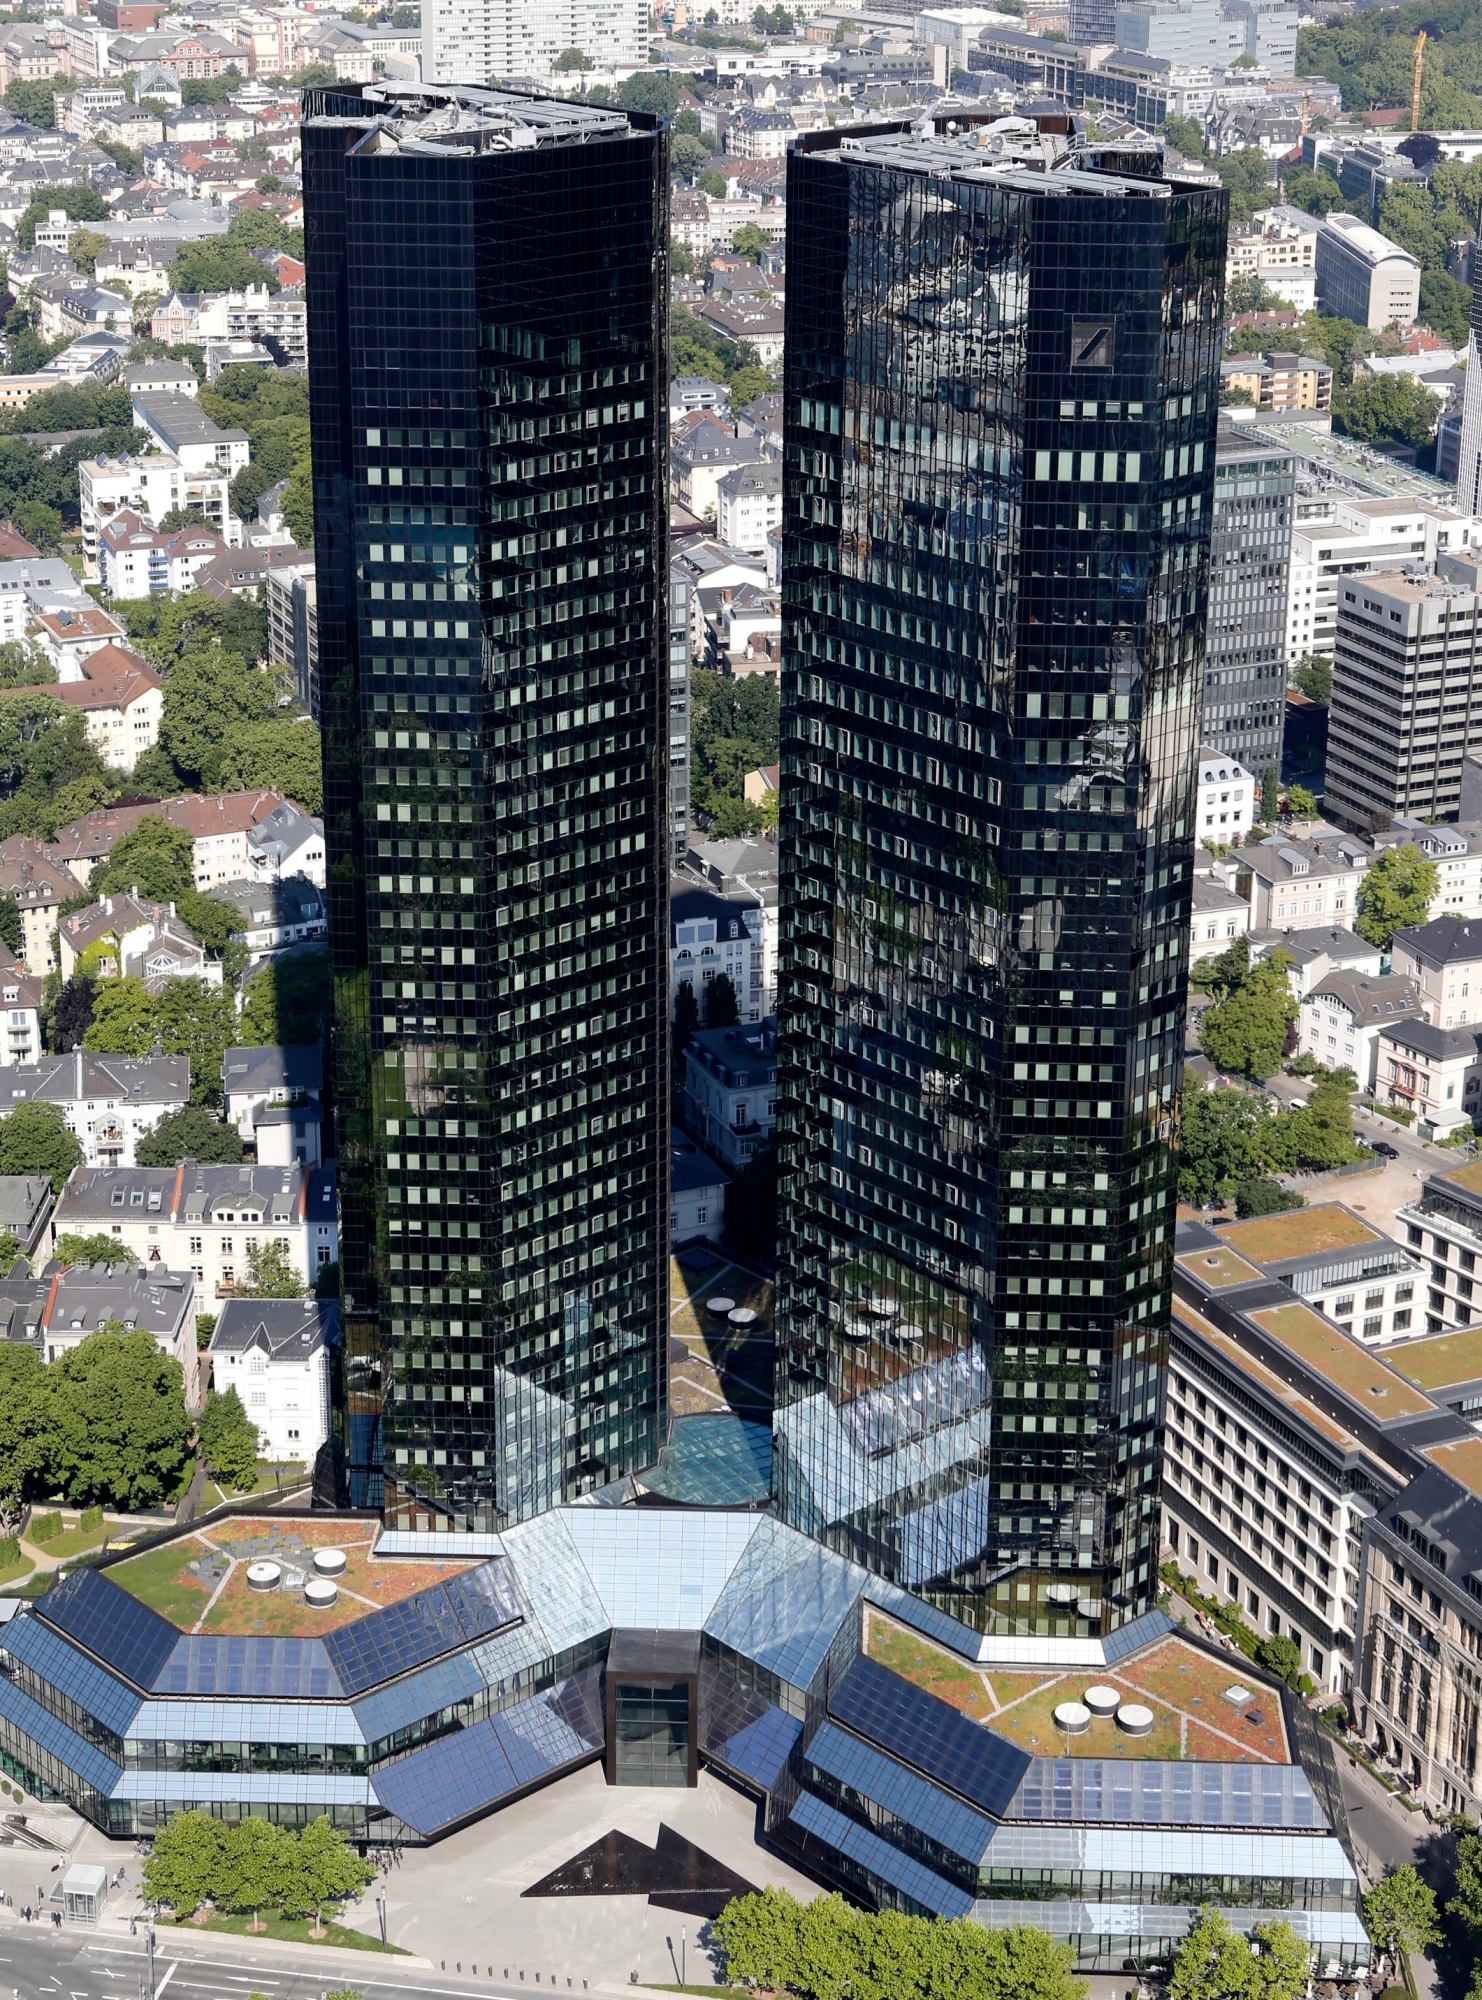 Deutsche Bank headquarters in Frankfurt, Germany, photographed Monday, May 19, 2014. Deutsche Bank AG says raising 8 billion euros (US $11 billion) in new capital from investors will strengthen its finances as it faces tighter regulation and uncertain costs from litigation.  (AP Photo/Michael Probst) Germany Deutsche Bank